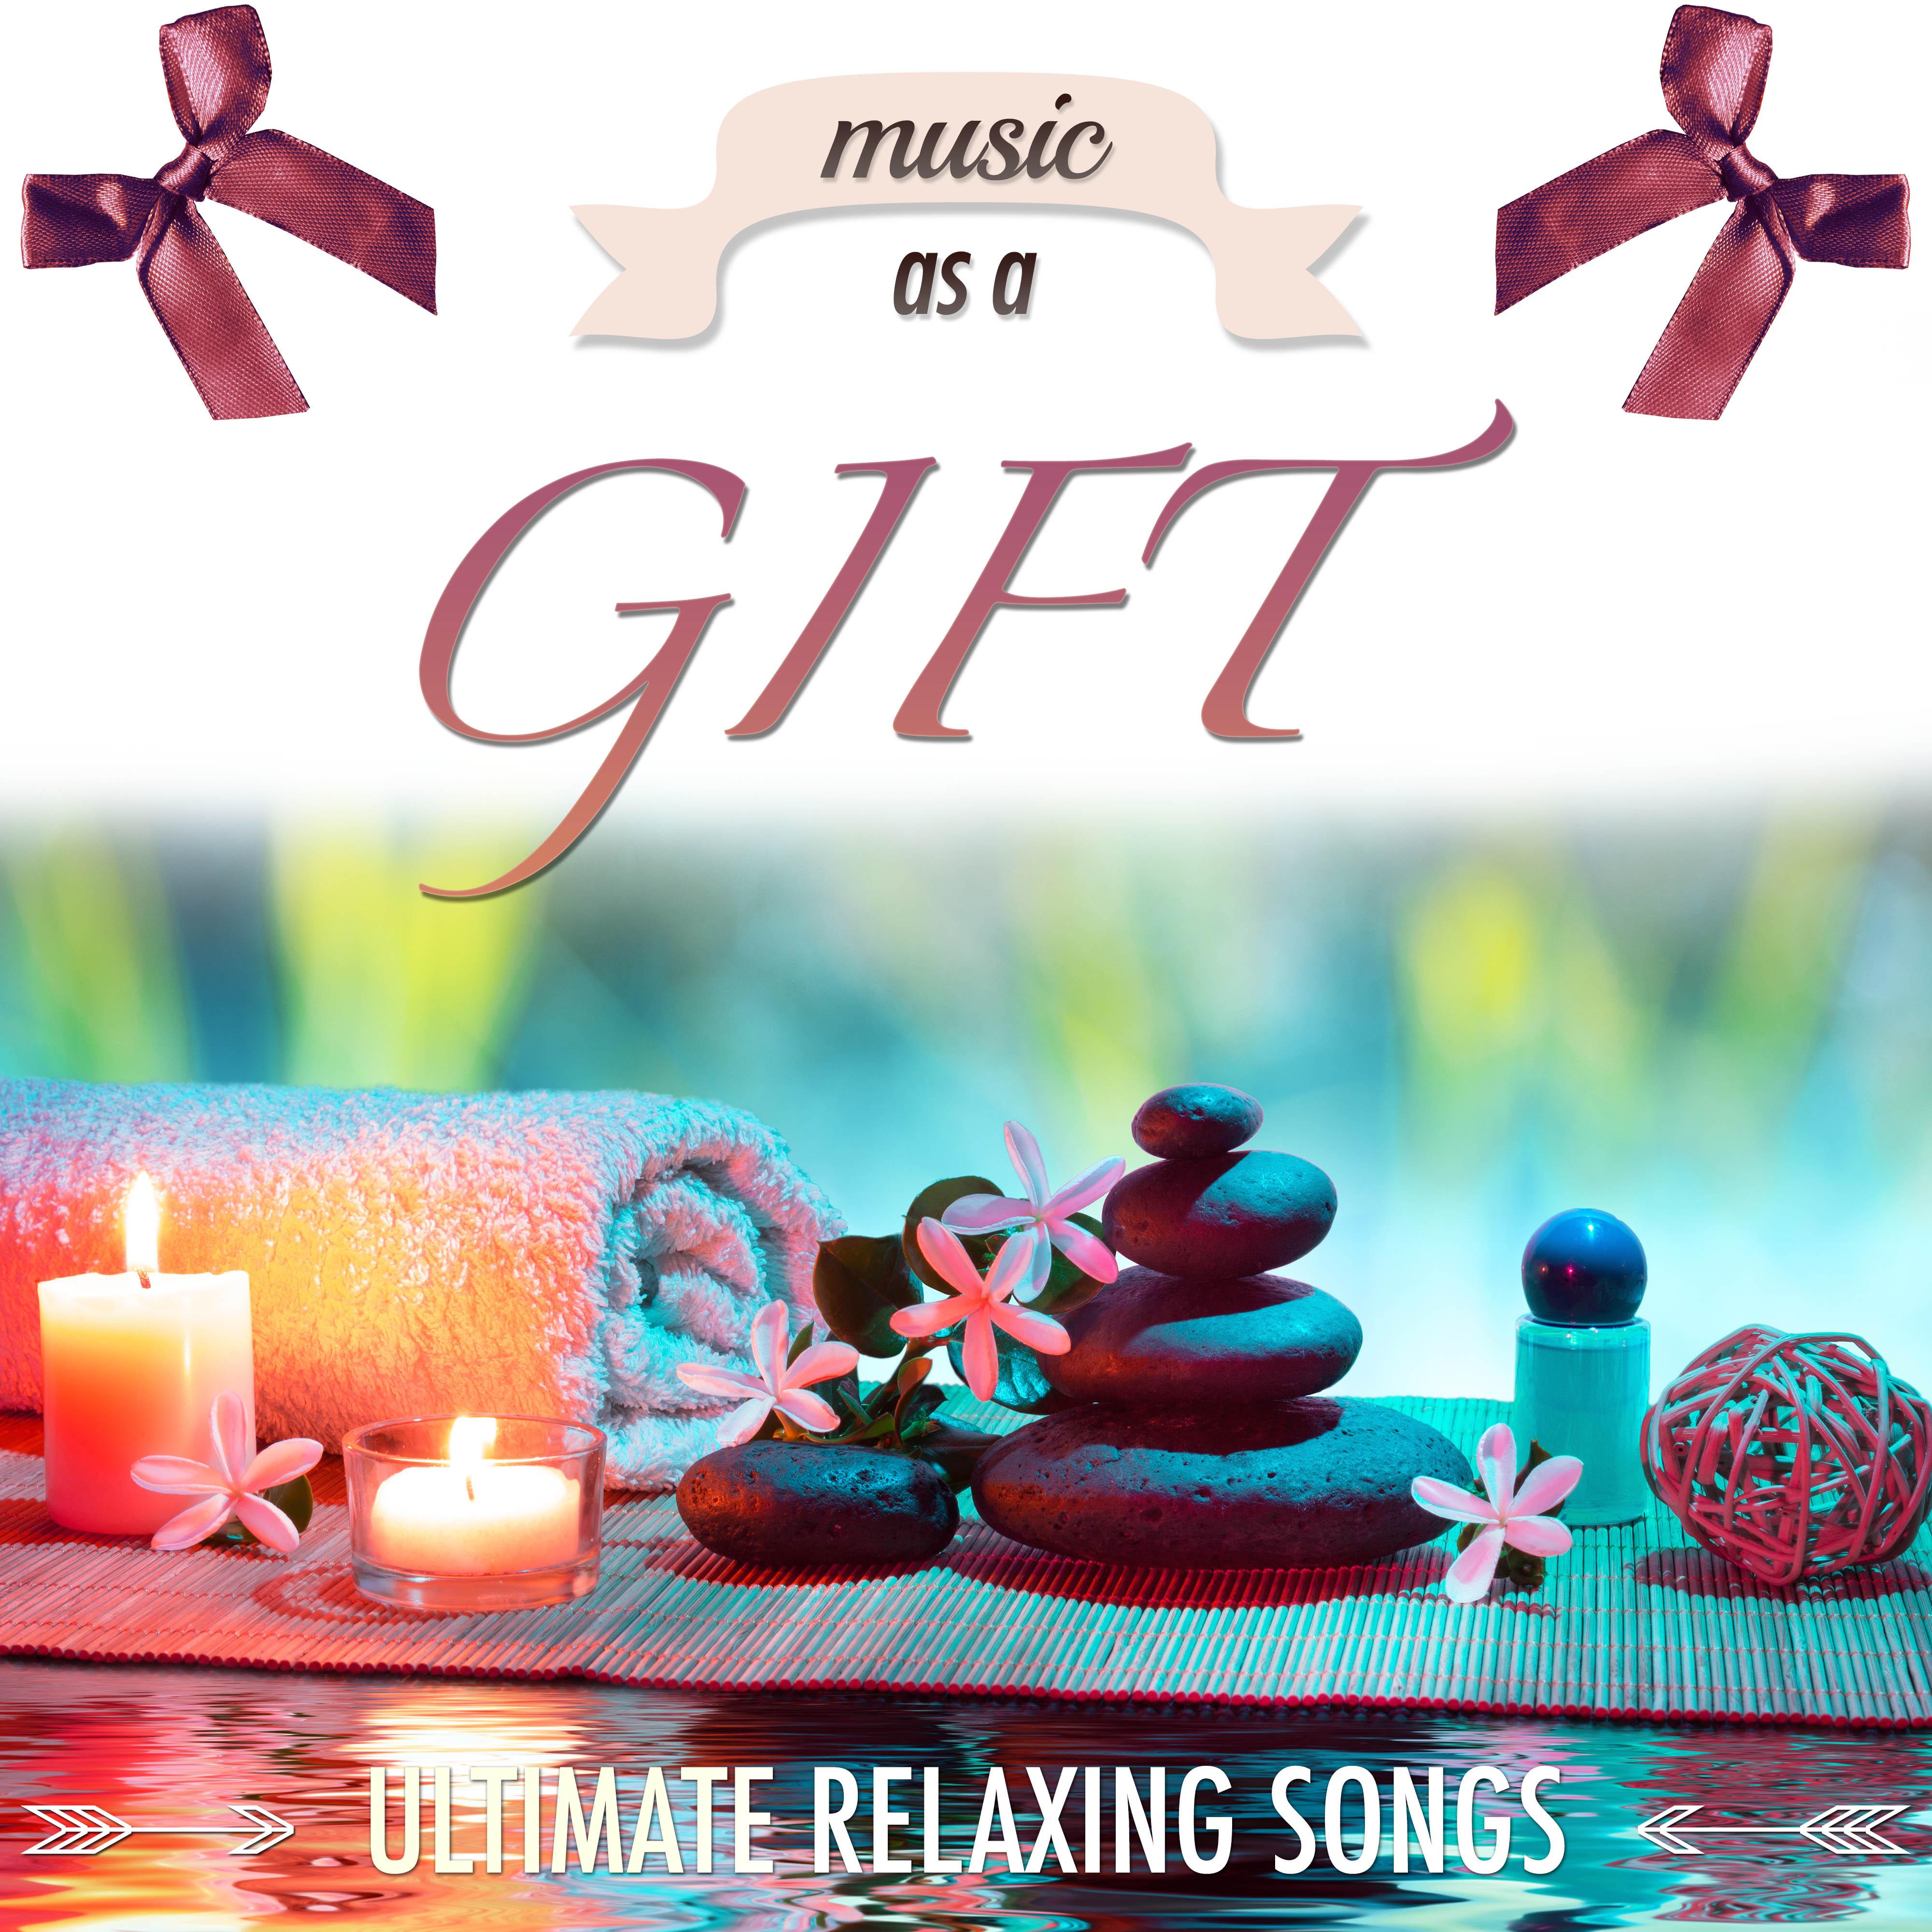 Music as a Gift: Ultimate Relaxing Songs to share, with Nature Sounds for Deep Relaxation, Stress Management, Love, Wellness and Peace